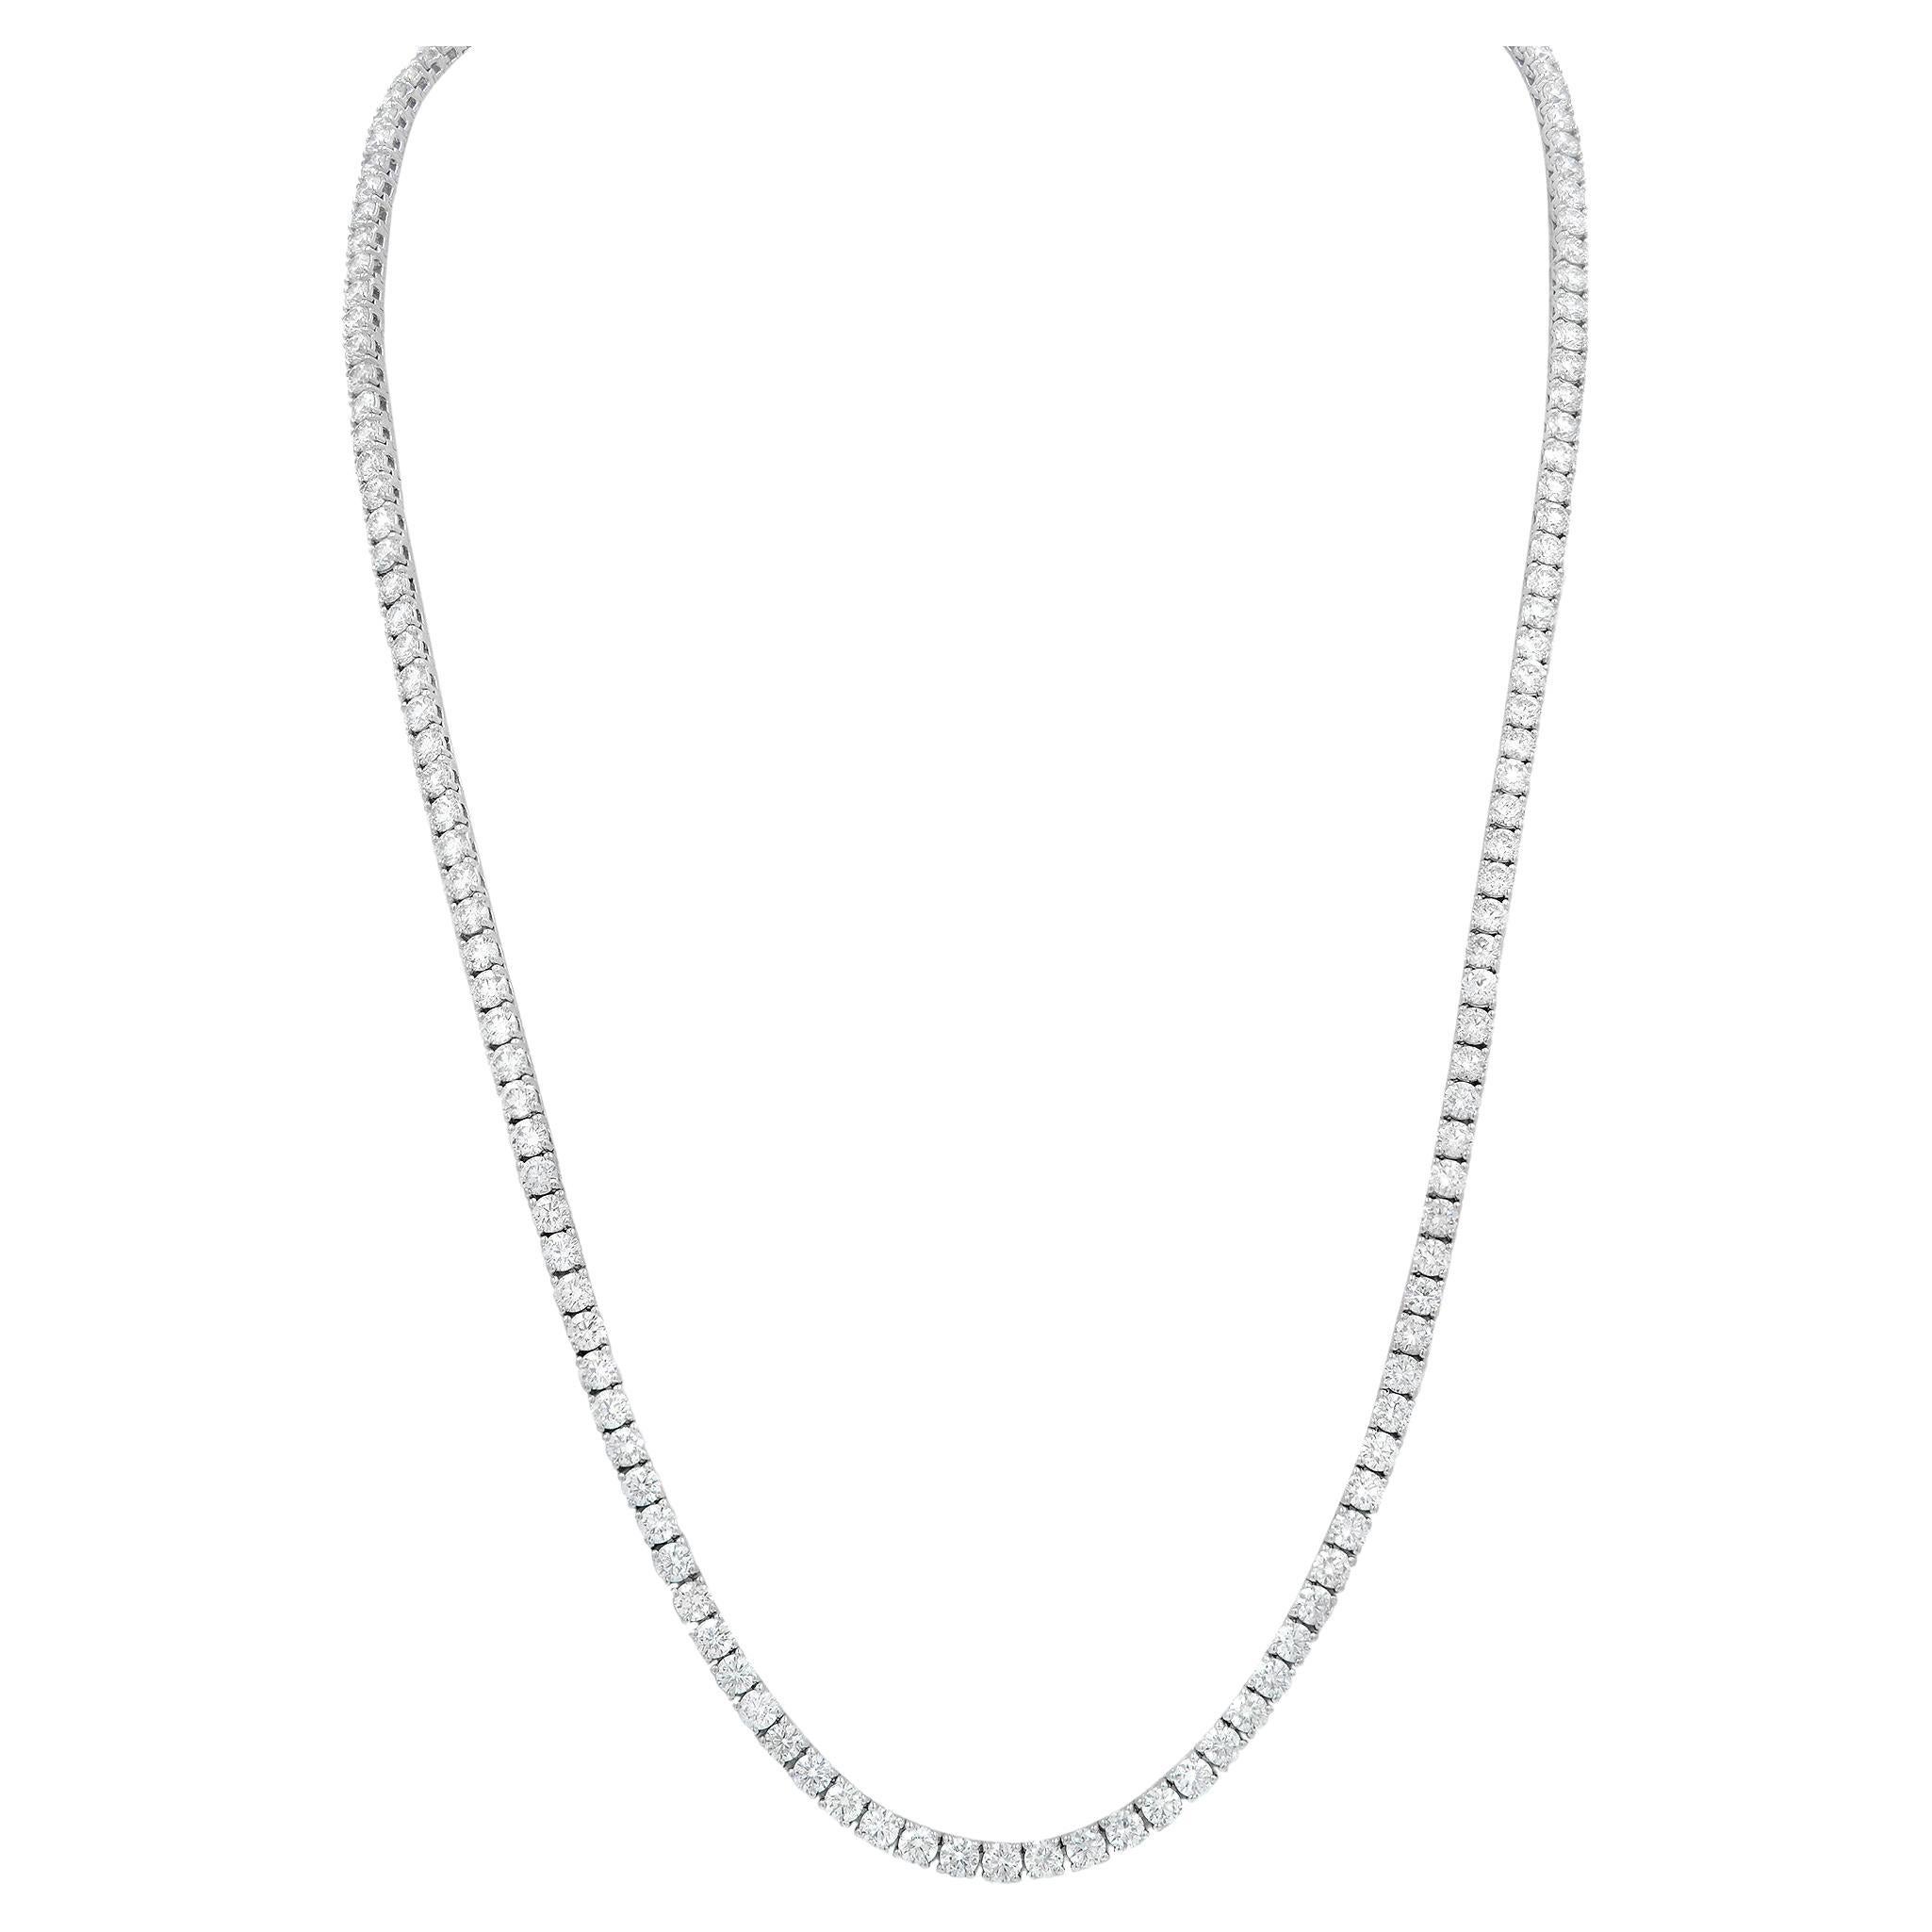 Woman in Dentistry all in 14 KT white gold necklace – Original Fashion  Trends